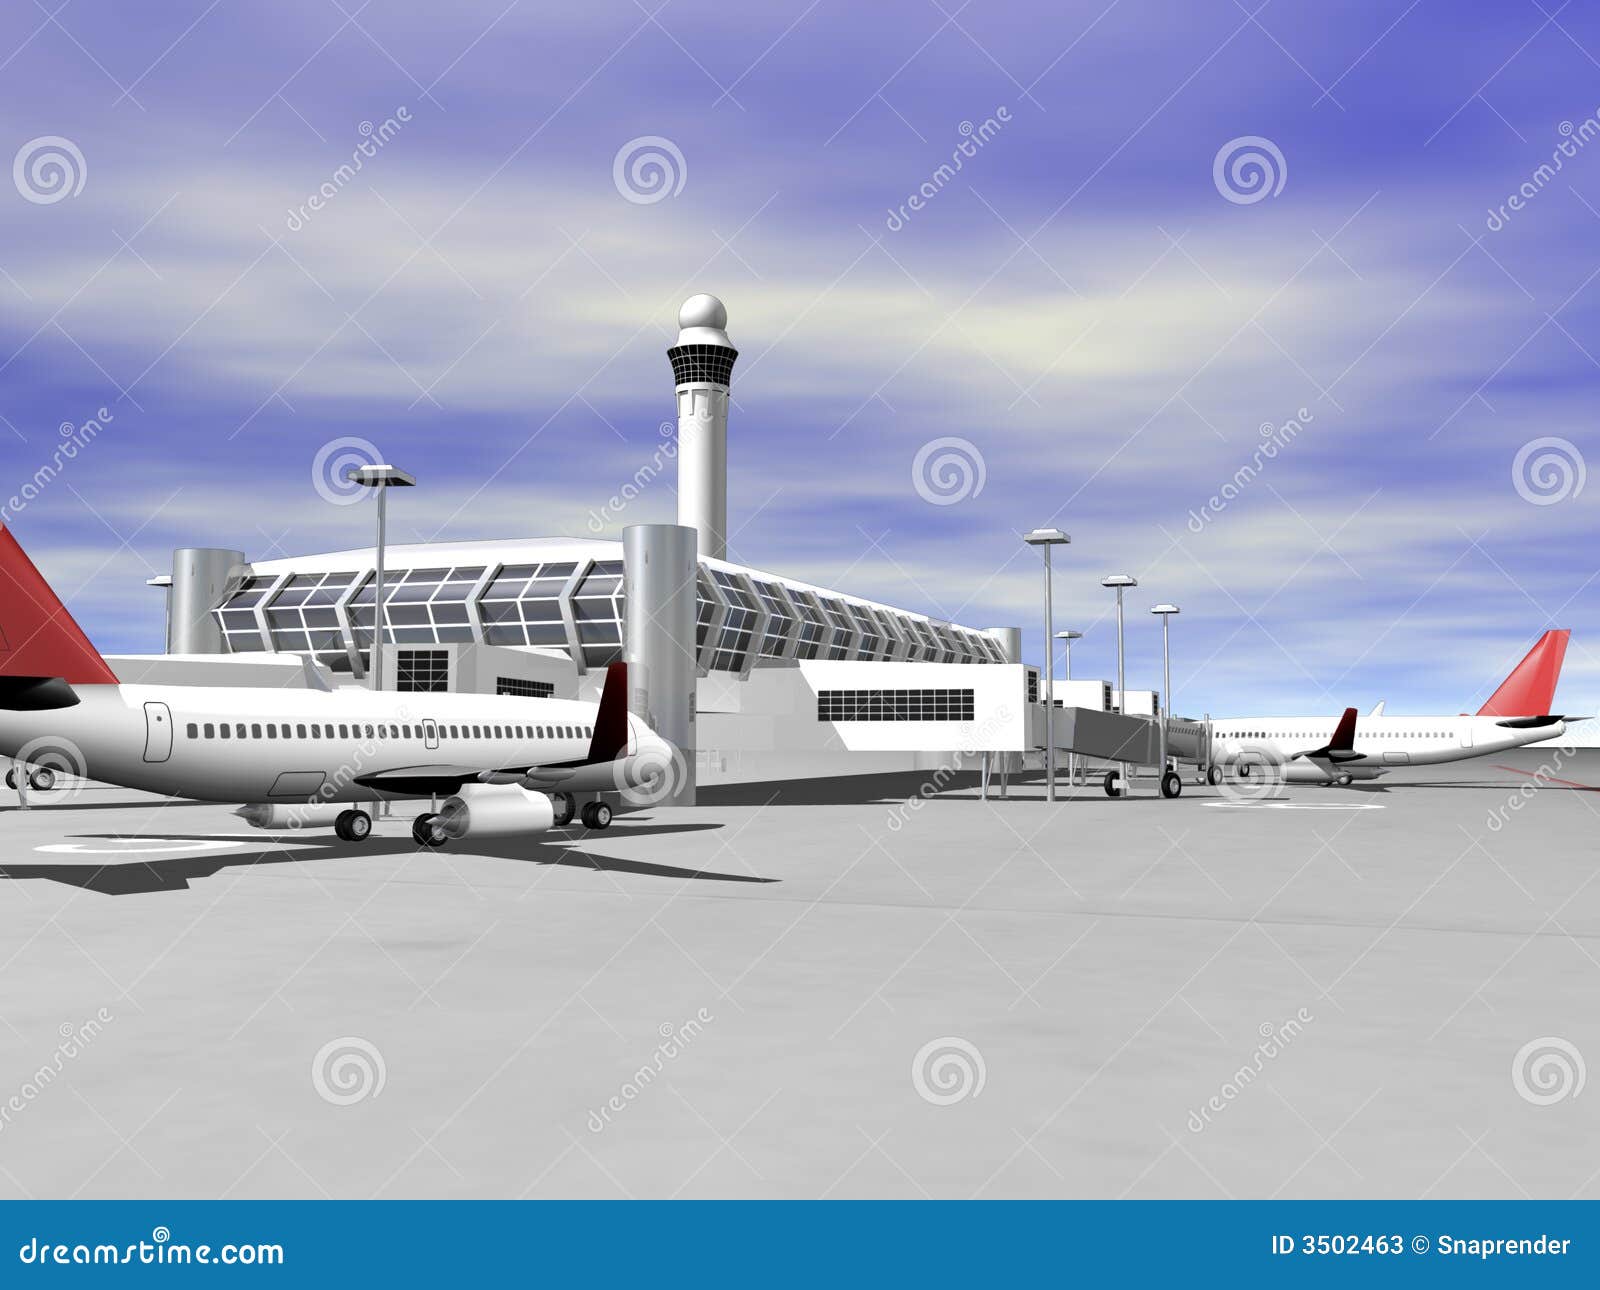 clipart airport - photo #30